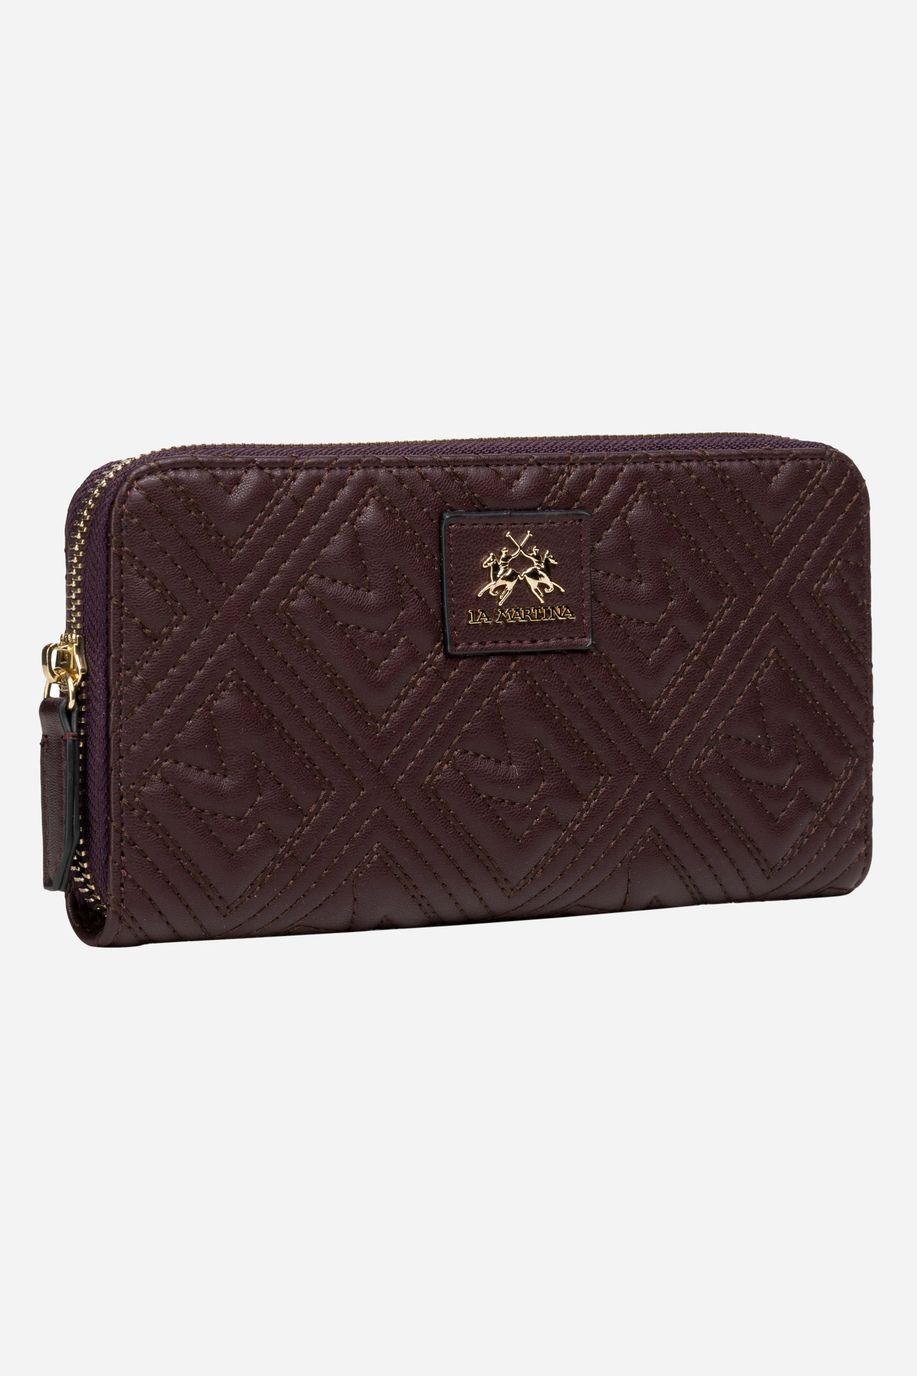 Wallet solid color burgundy fabric pu - Alice - Monogrammed gifts for her | La Martina - Official Online Shop